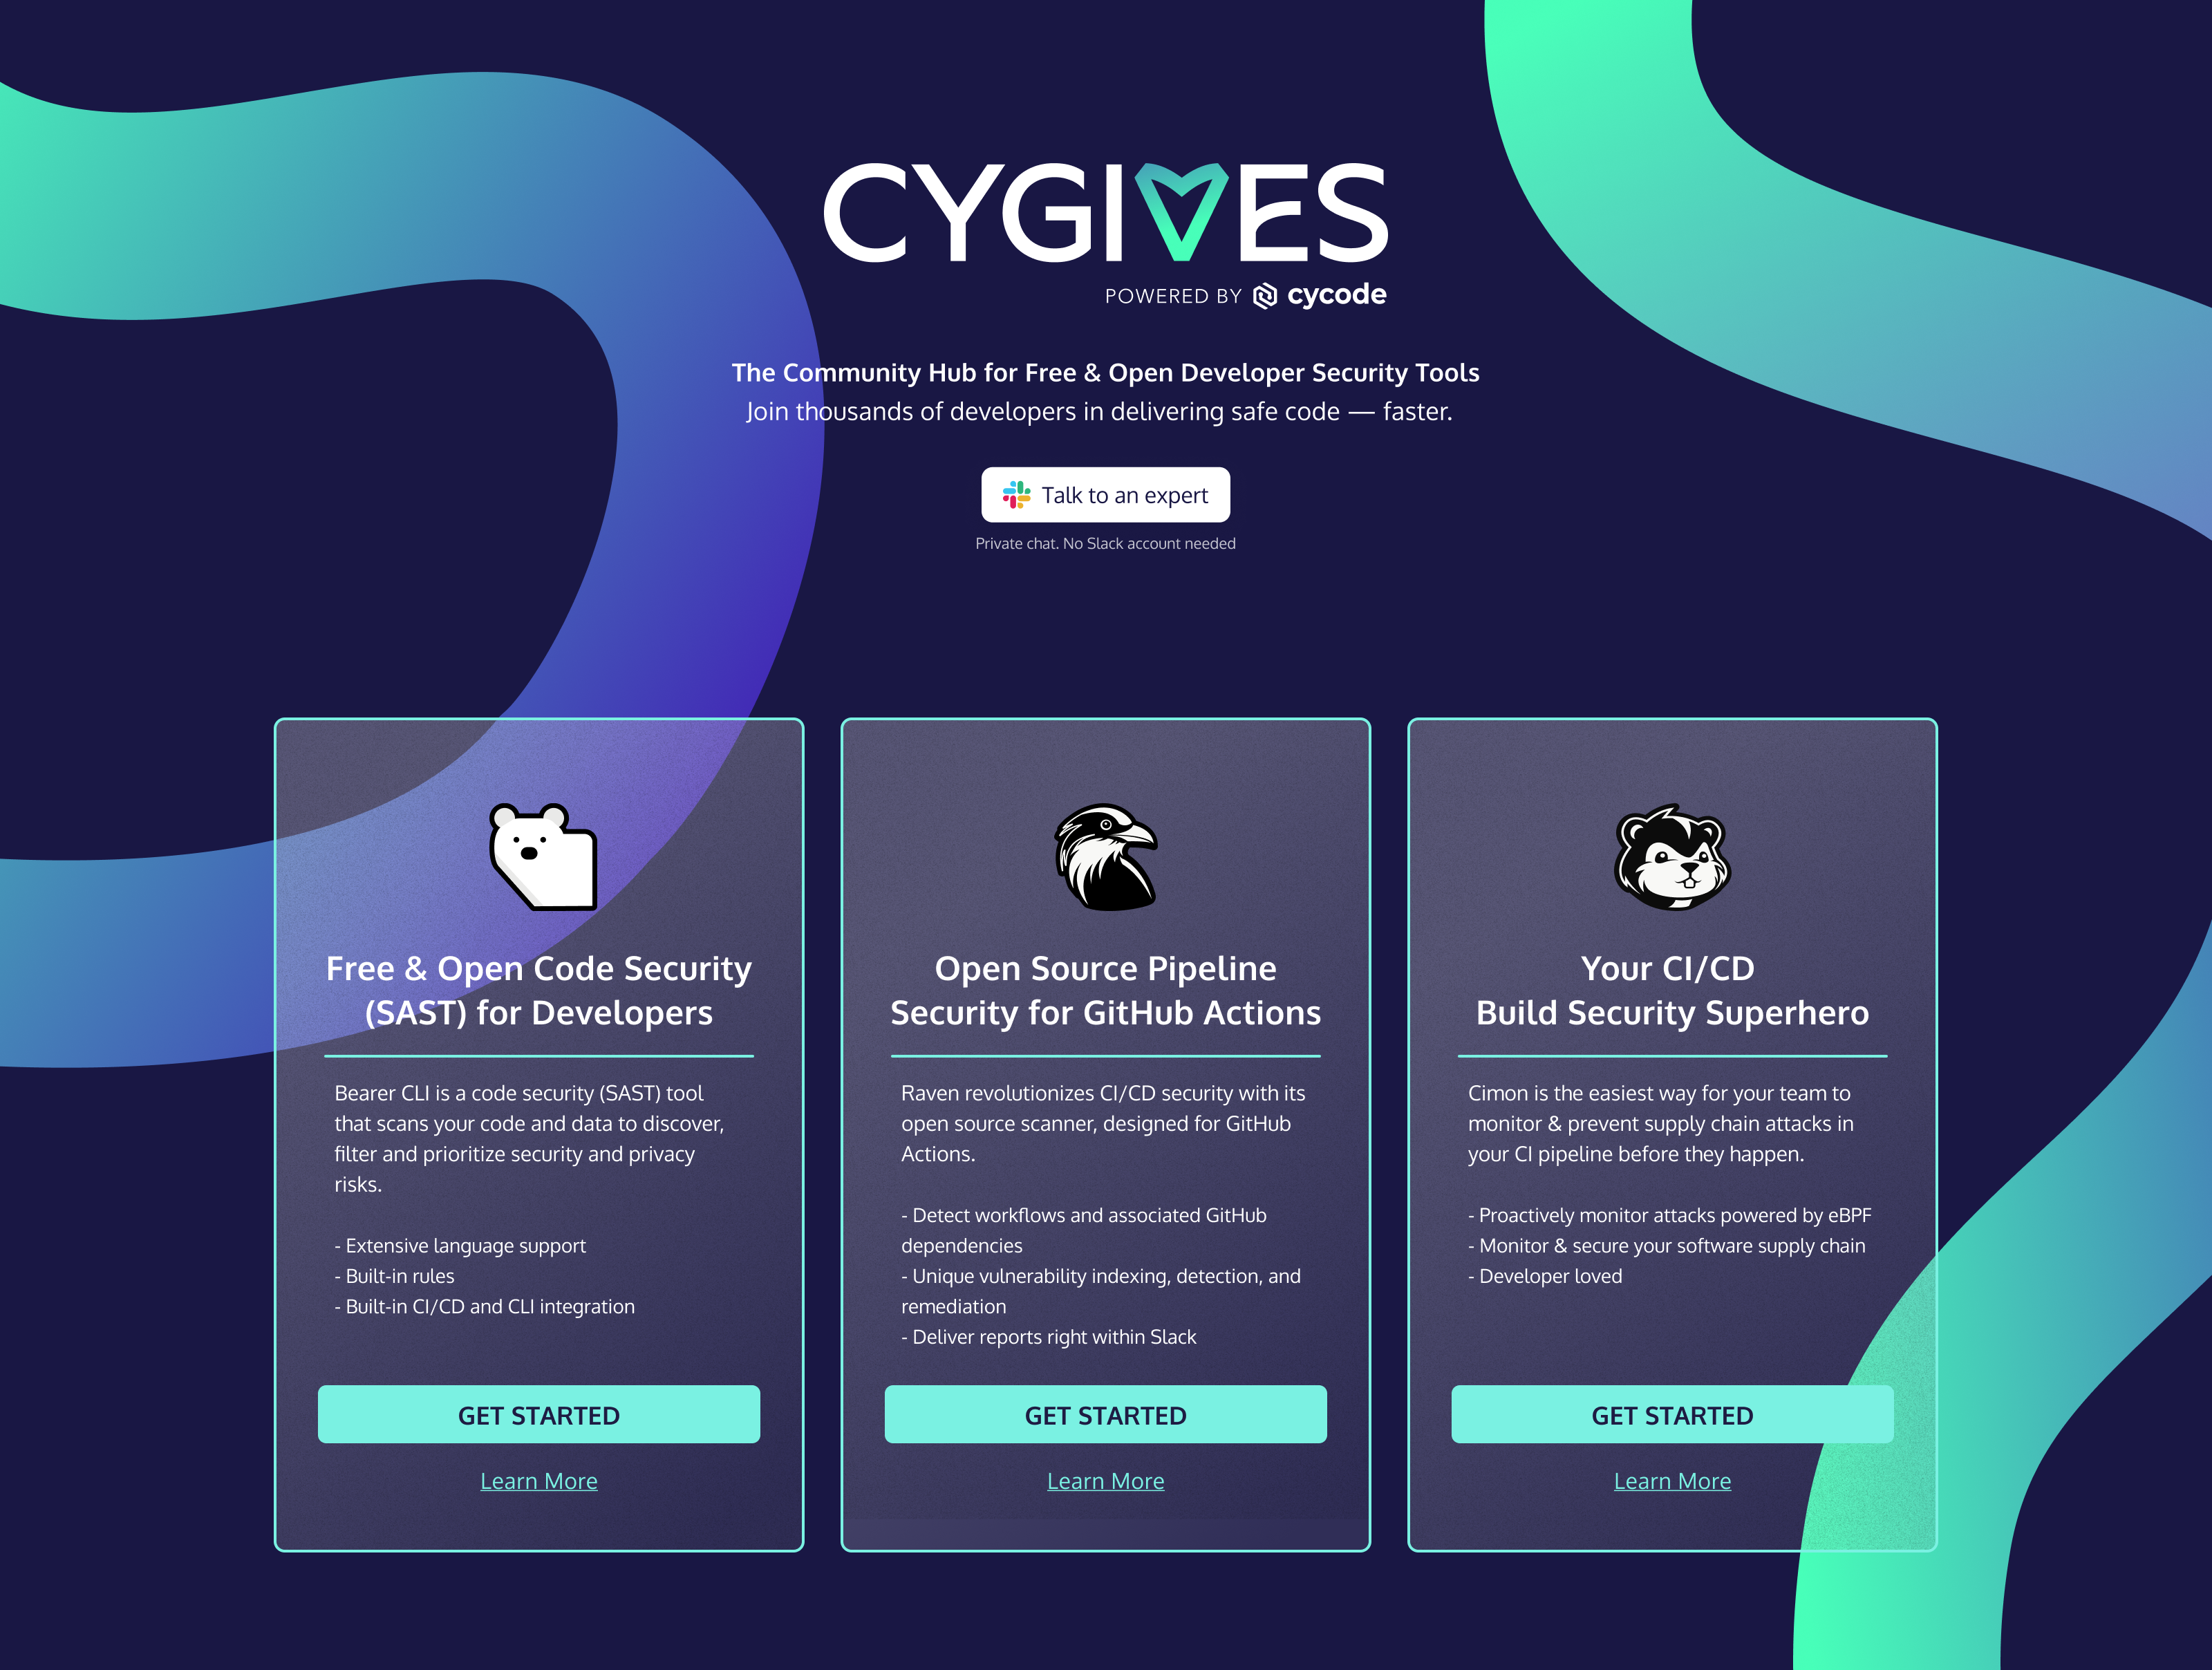 Cygives provides free & open tools for the developer community powered by Cycode.